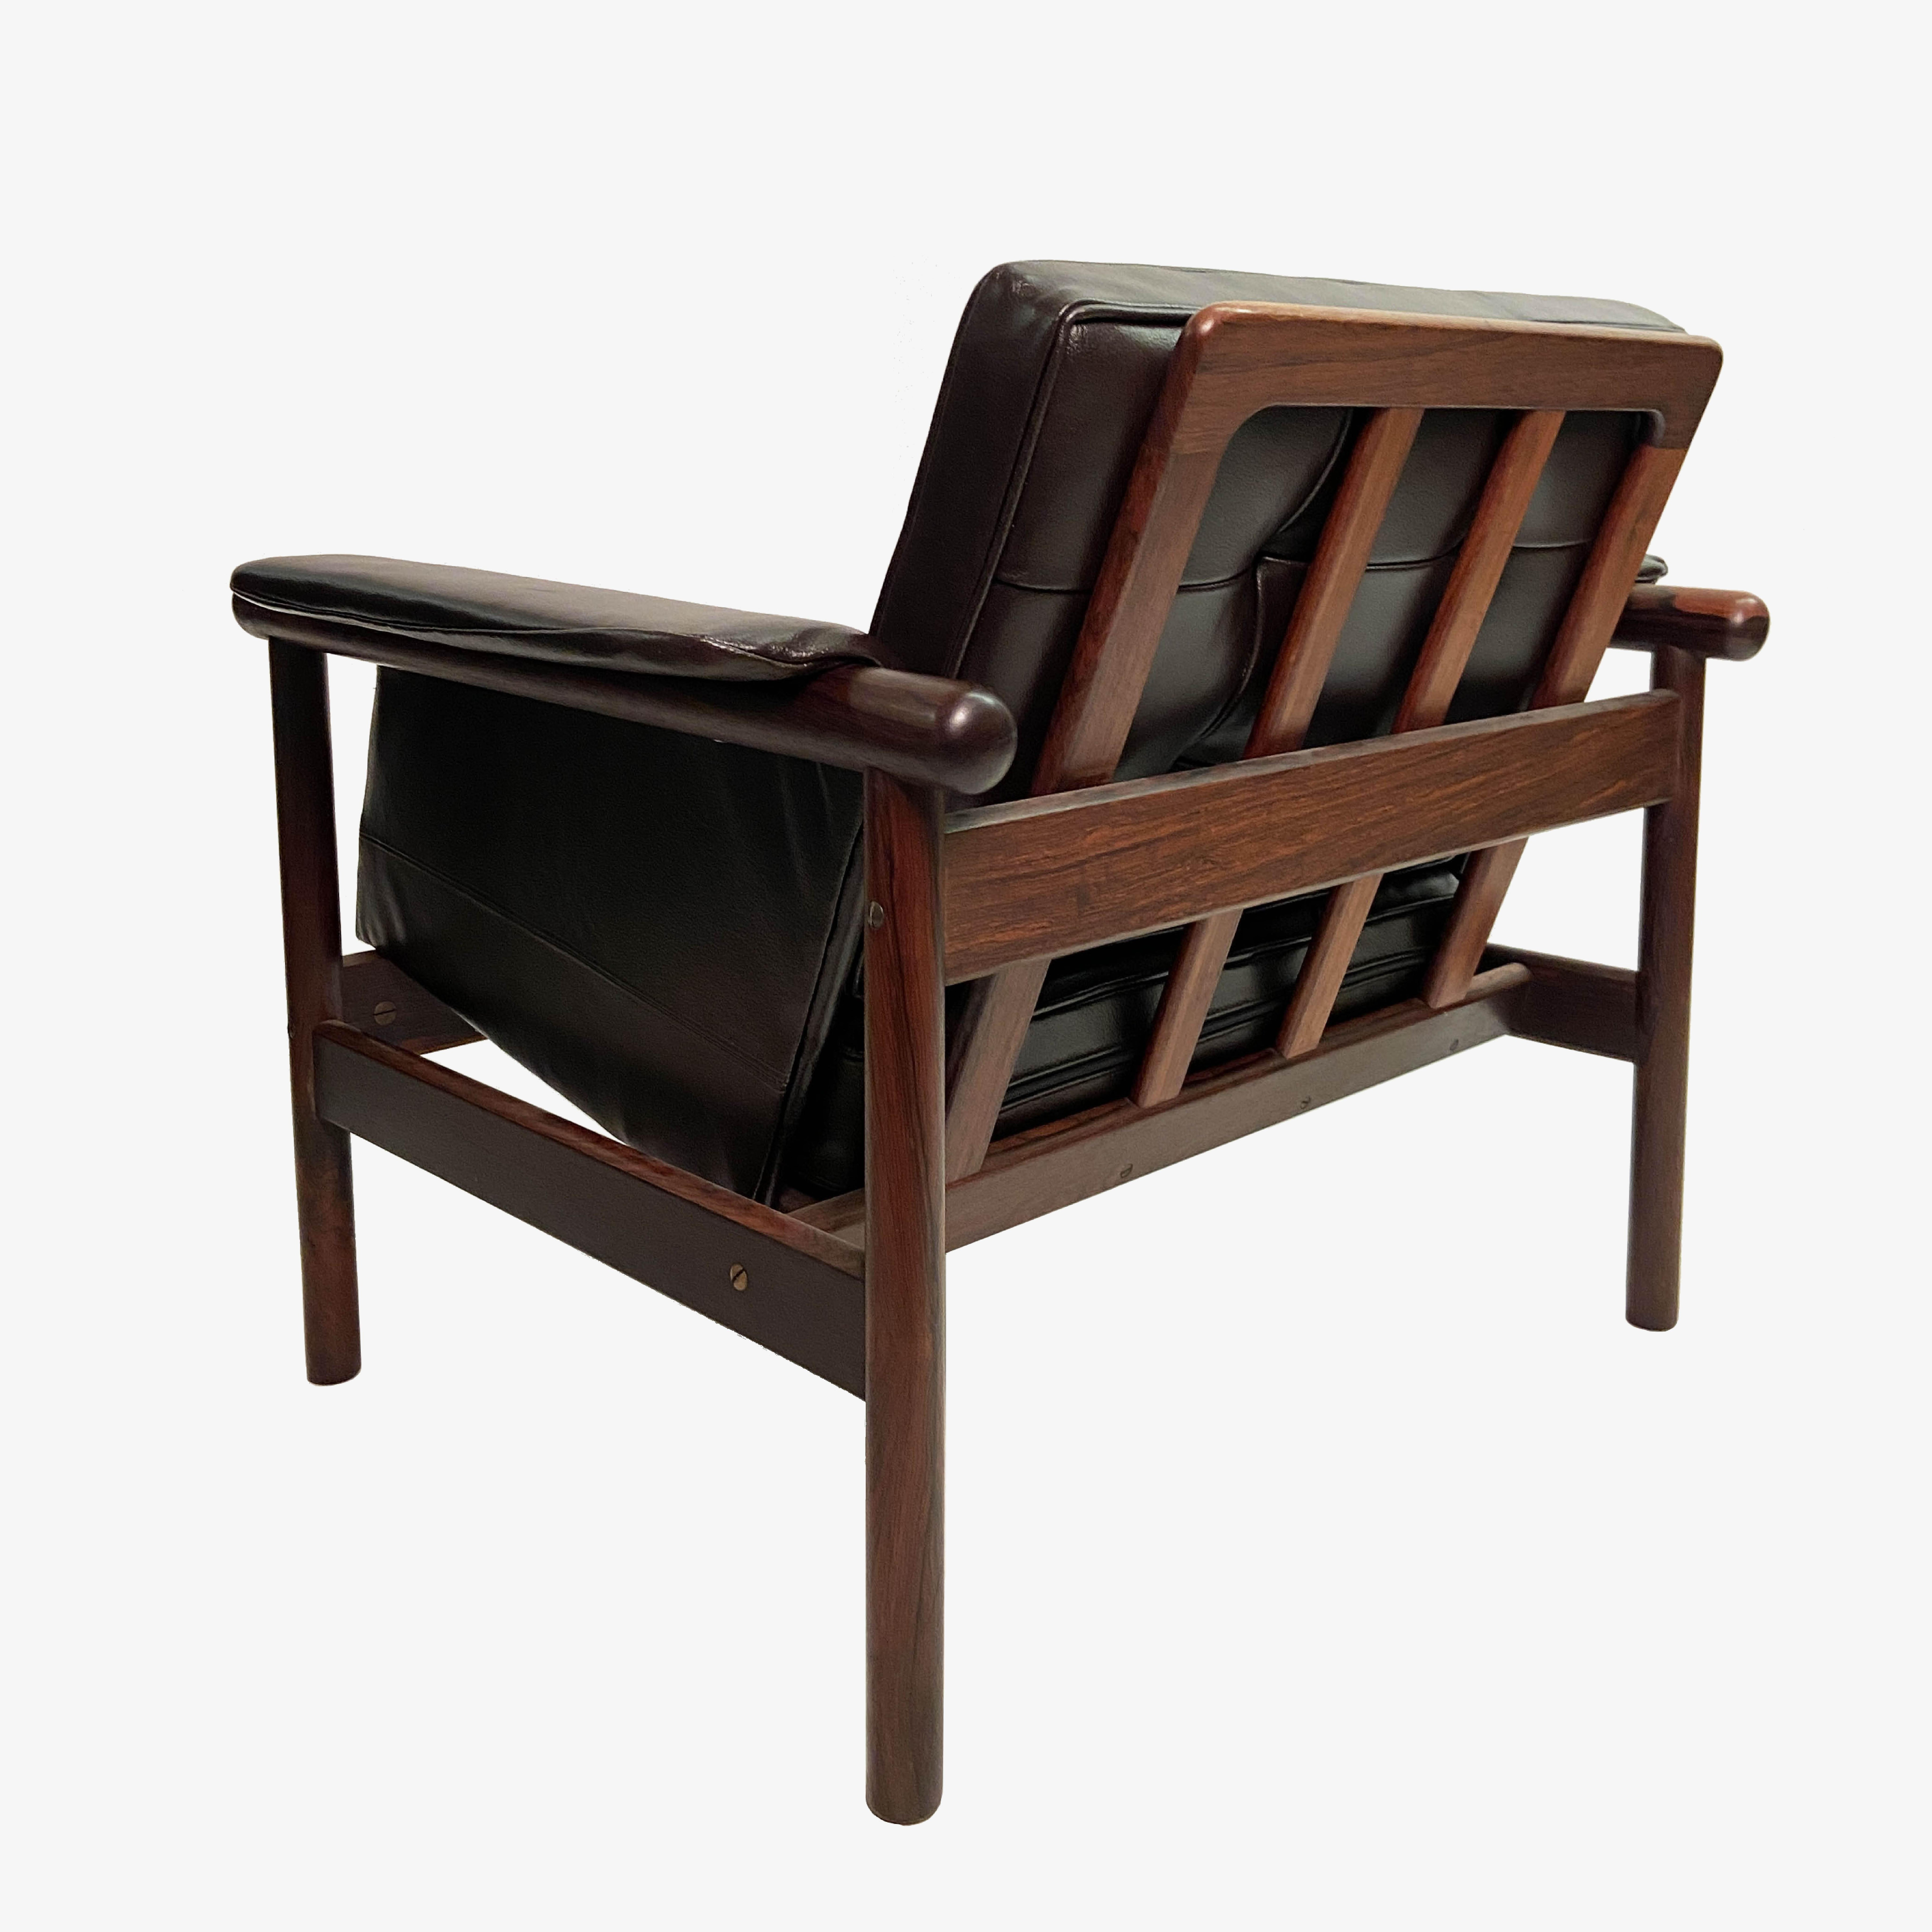 Mid-20th Century Illum Wikkelsø 'Wiki' Lounge Chairs in Rosewood and Espresso Leather, Pair For Sale